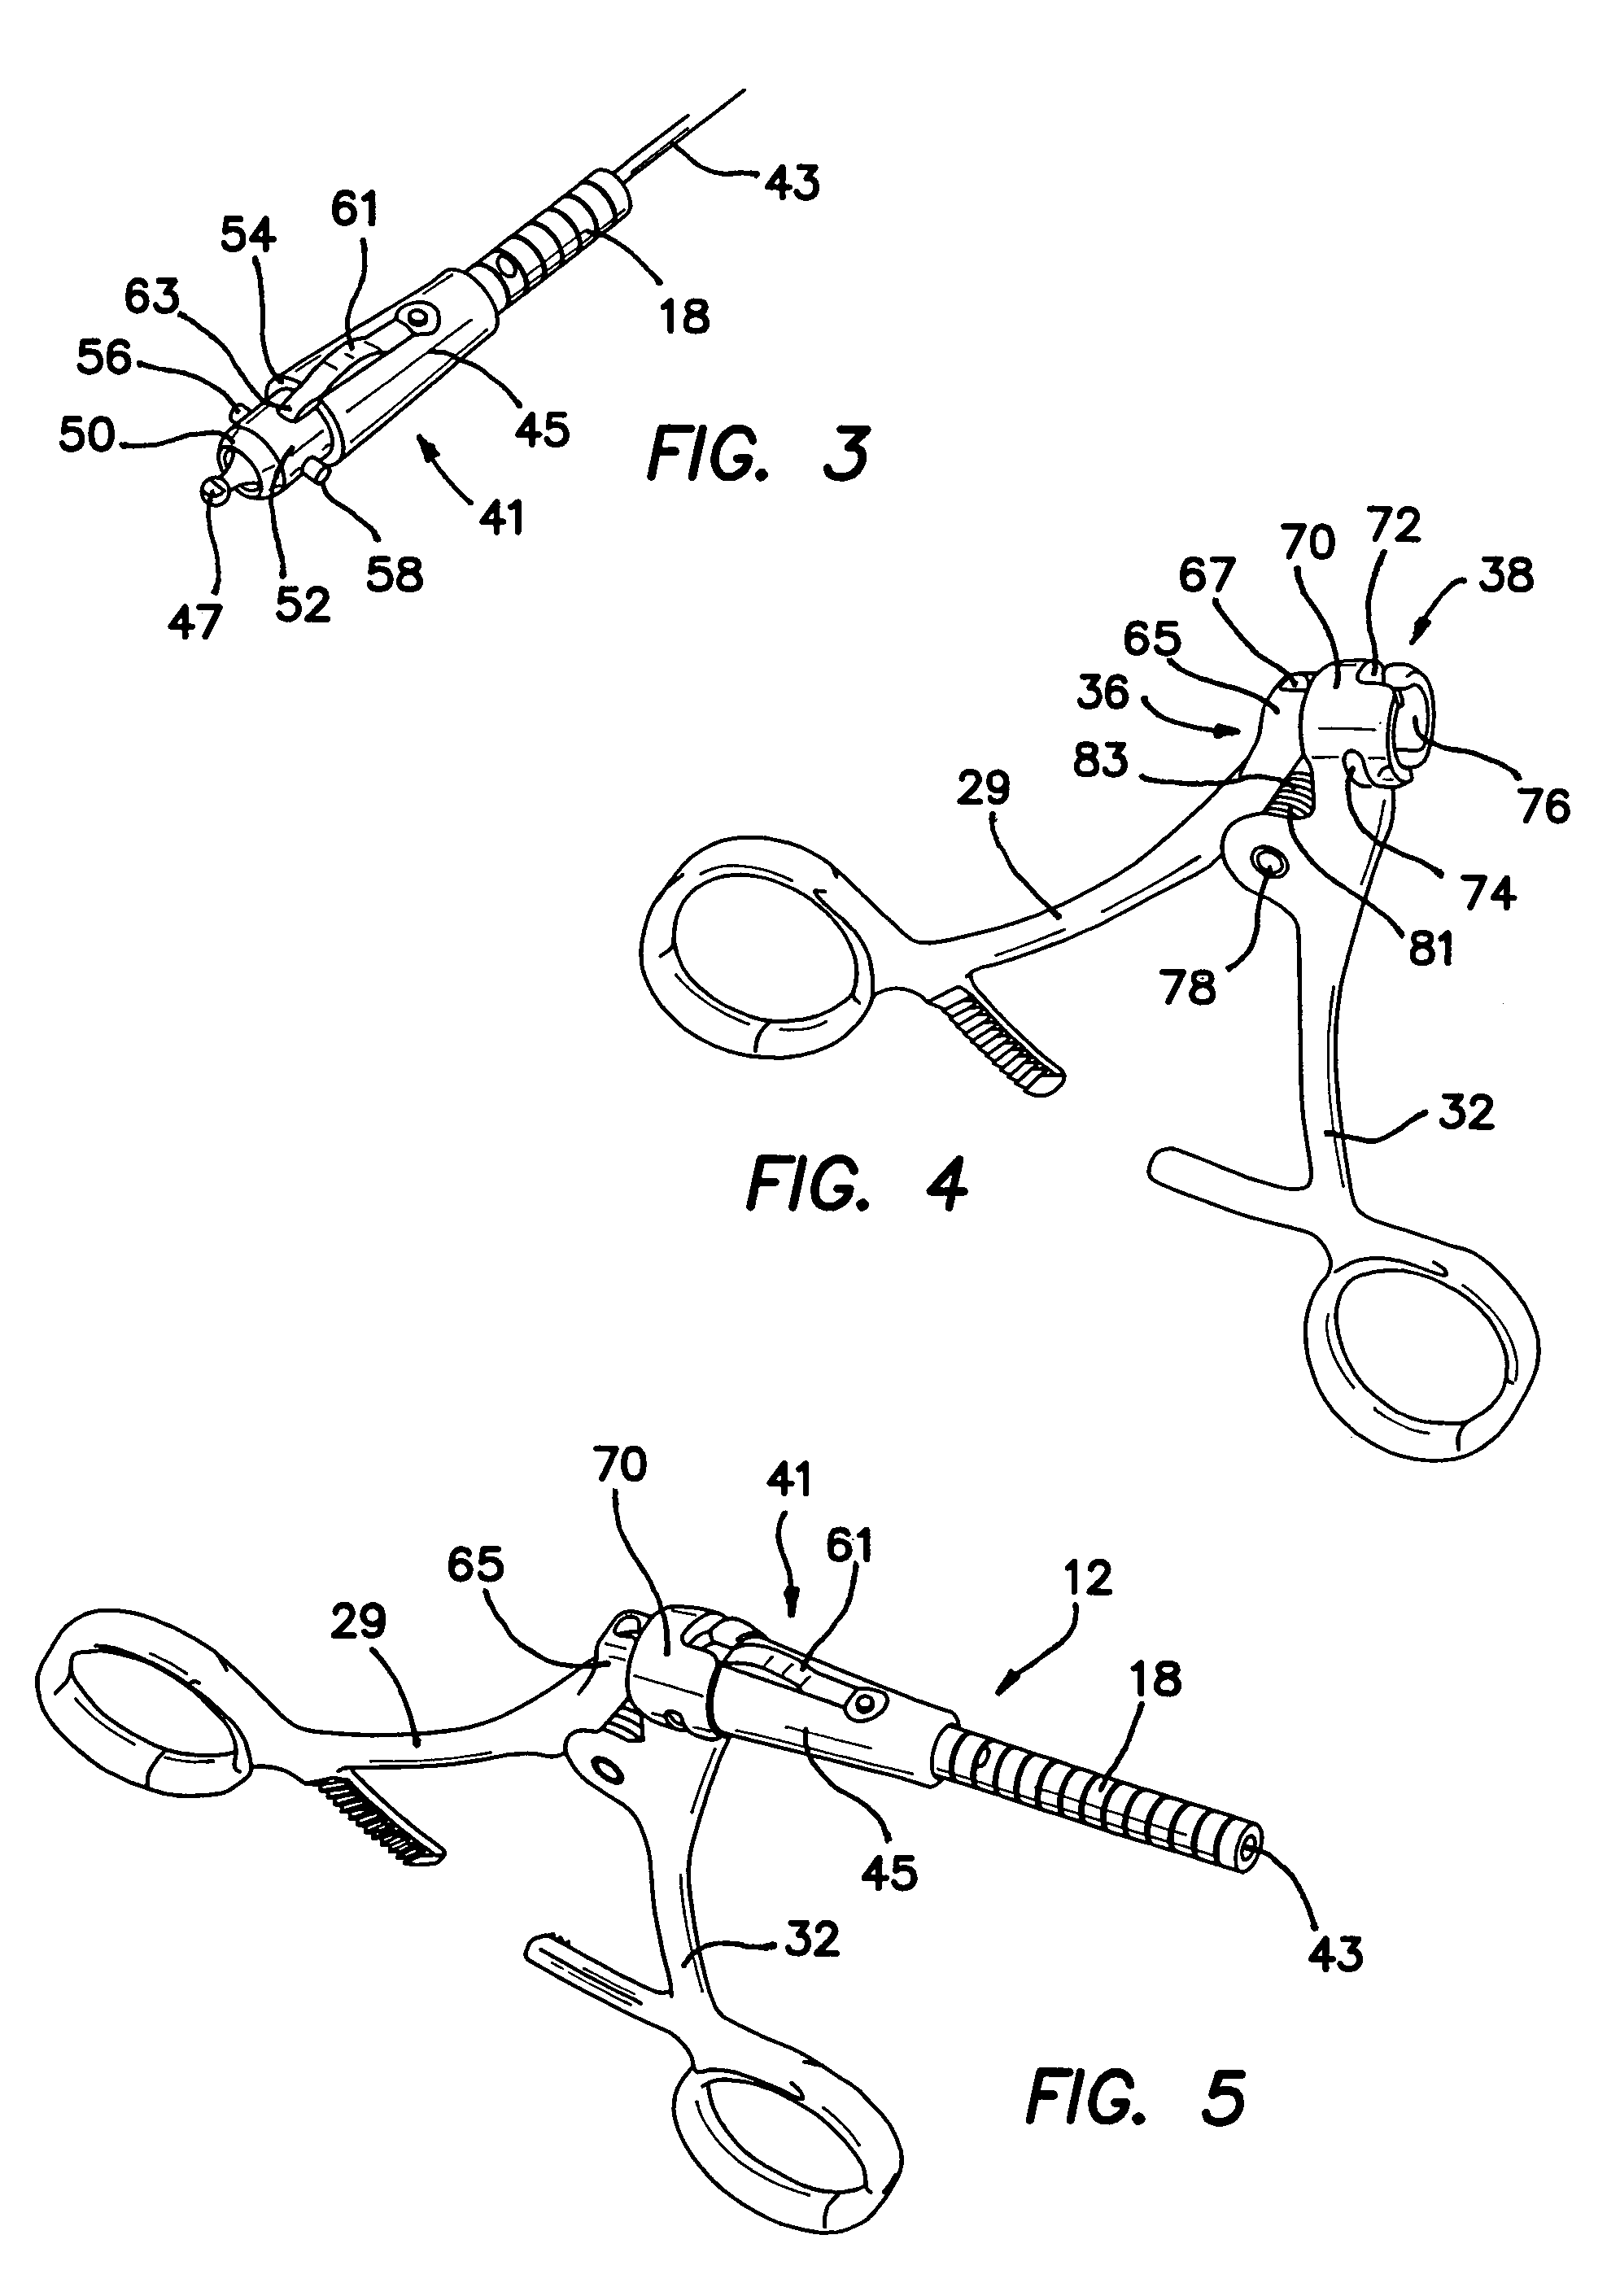 Surgical instrument with removable shaft apparatus and method